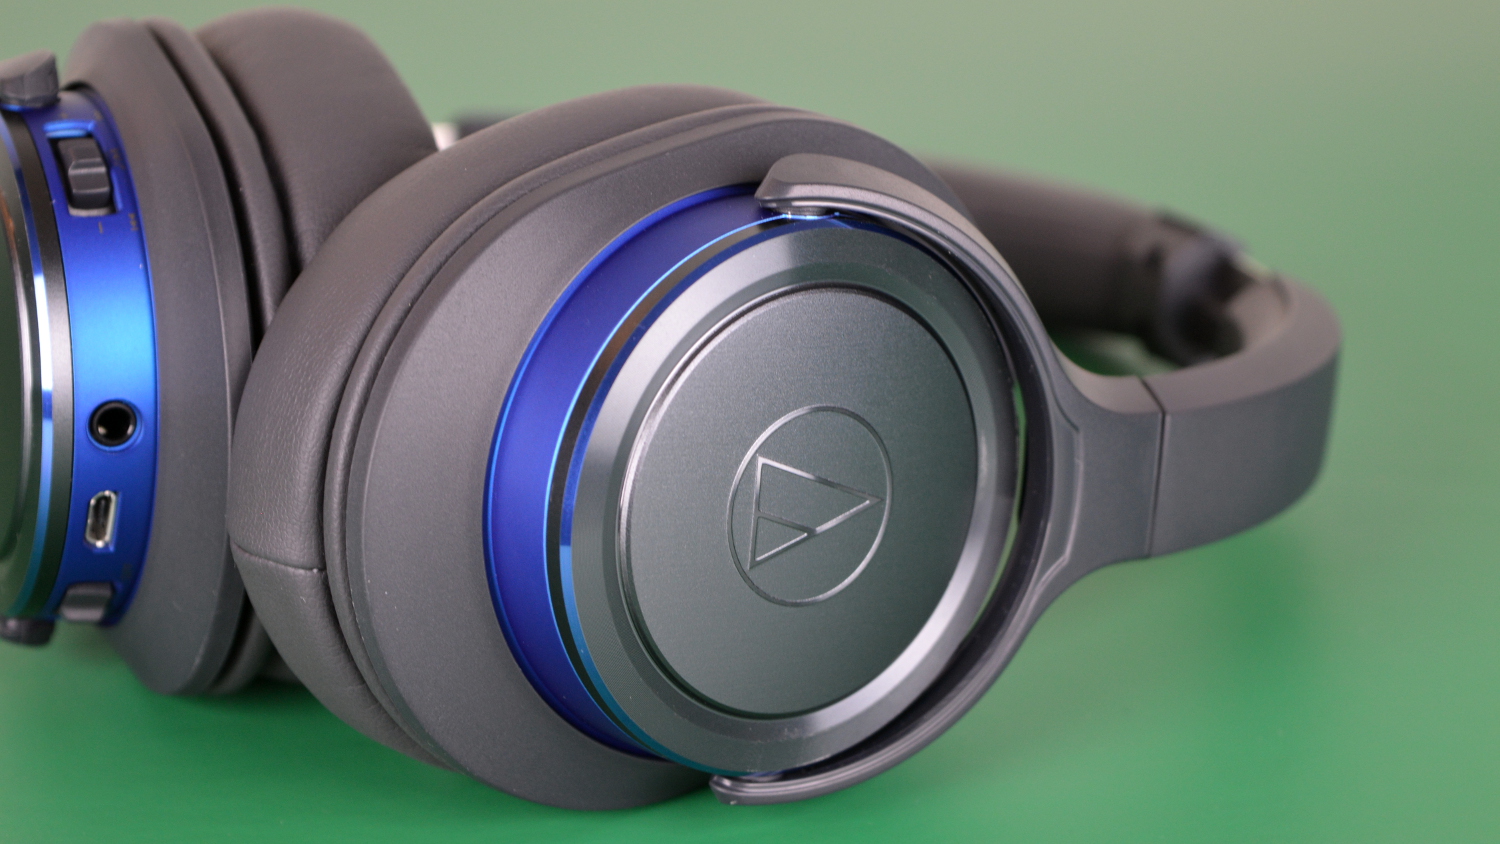 Audio Technica ATH-WS660BT Solid Bass Headphones Review Headphone Review